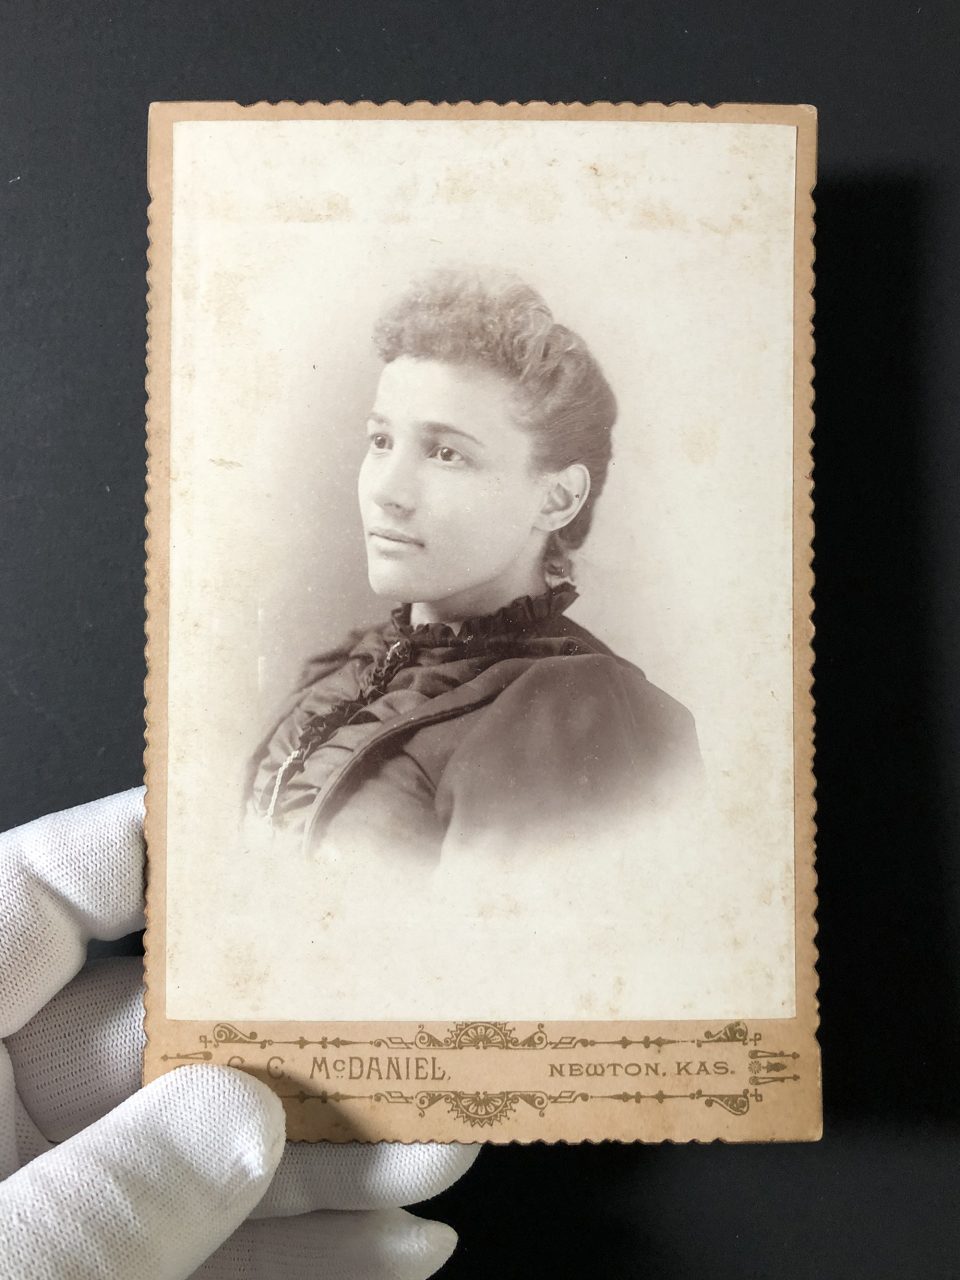 Cabinet card portrait of a young woman made in the late 1880s or early 1890s by photographer C.C. McDaniel in Newton, Kansas